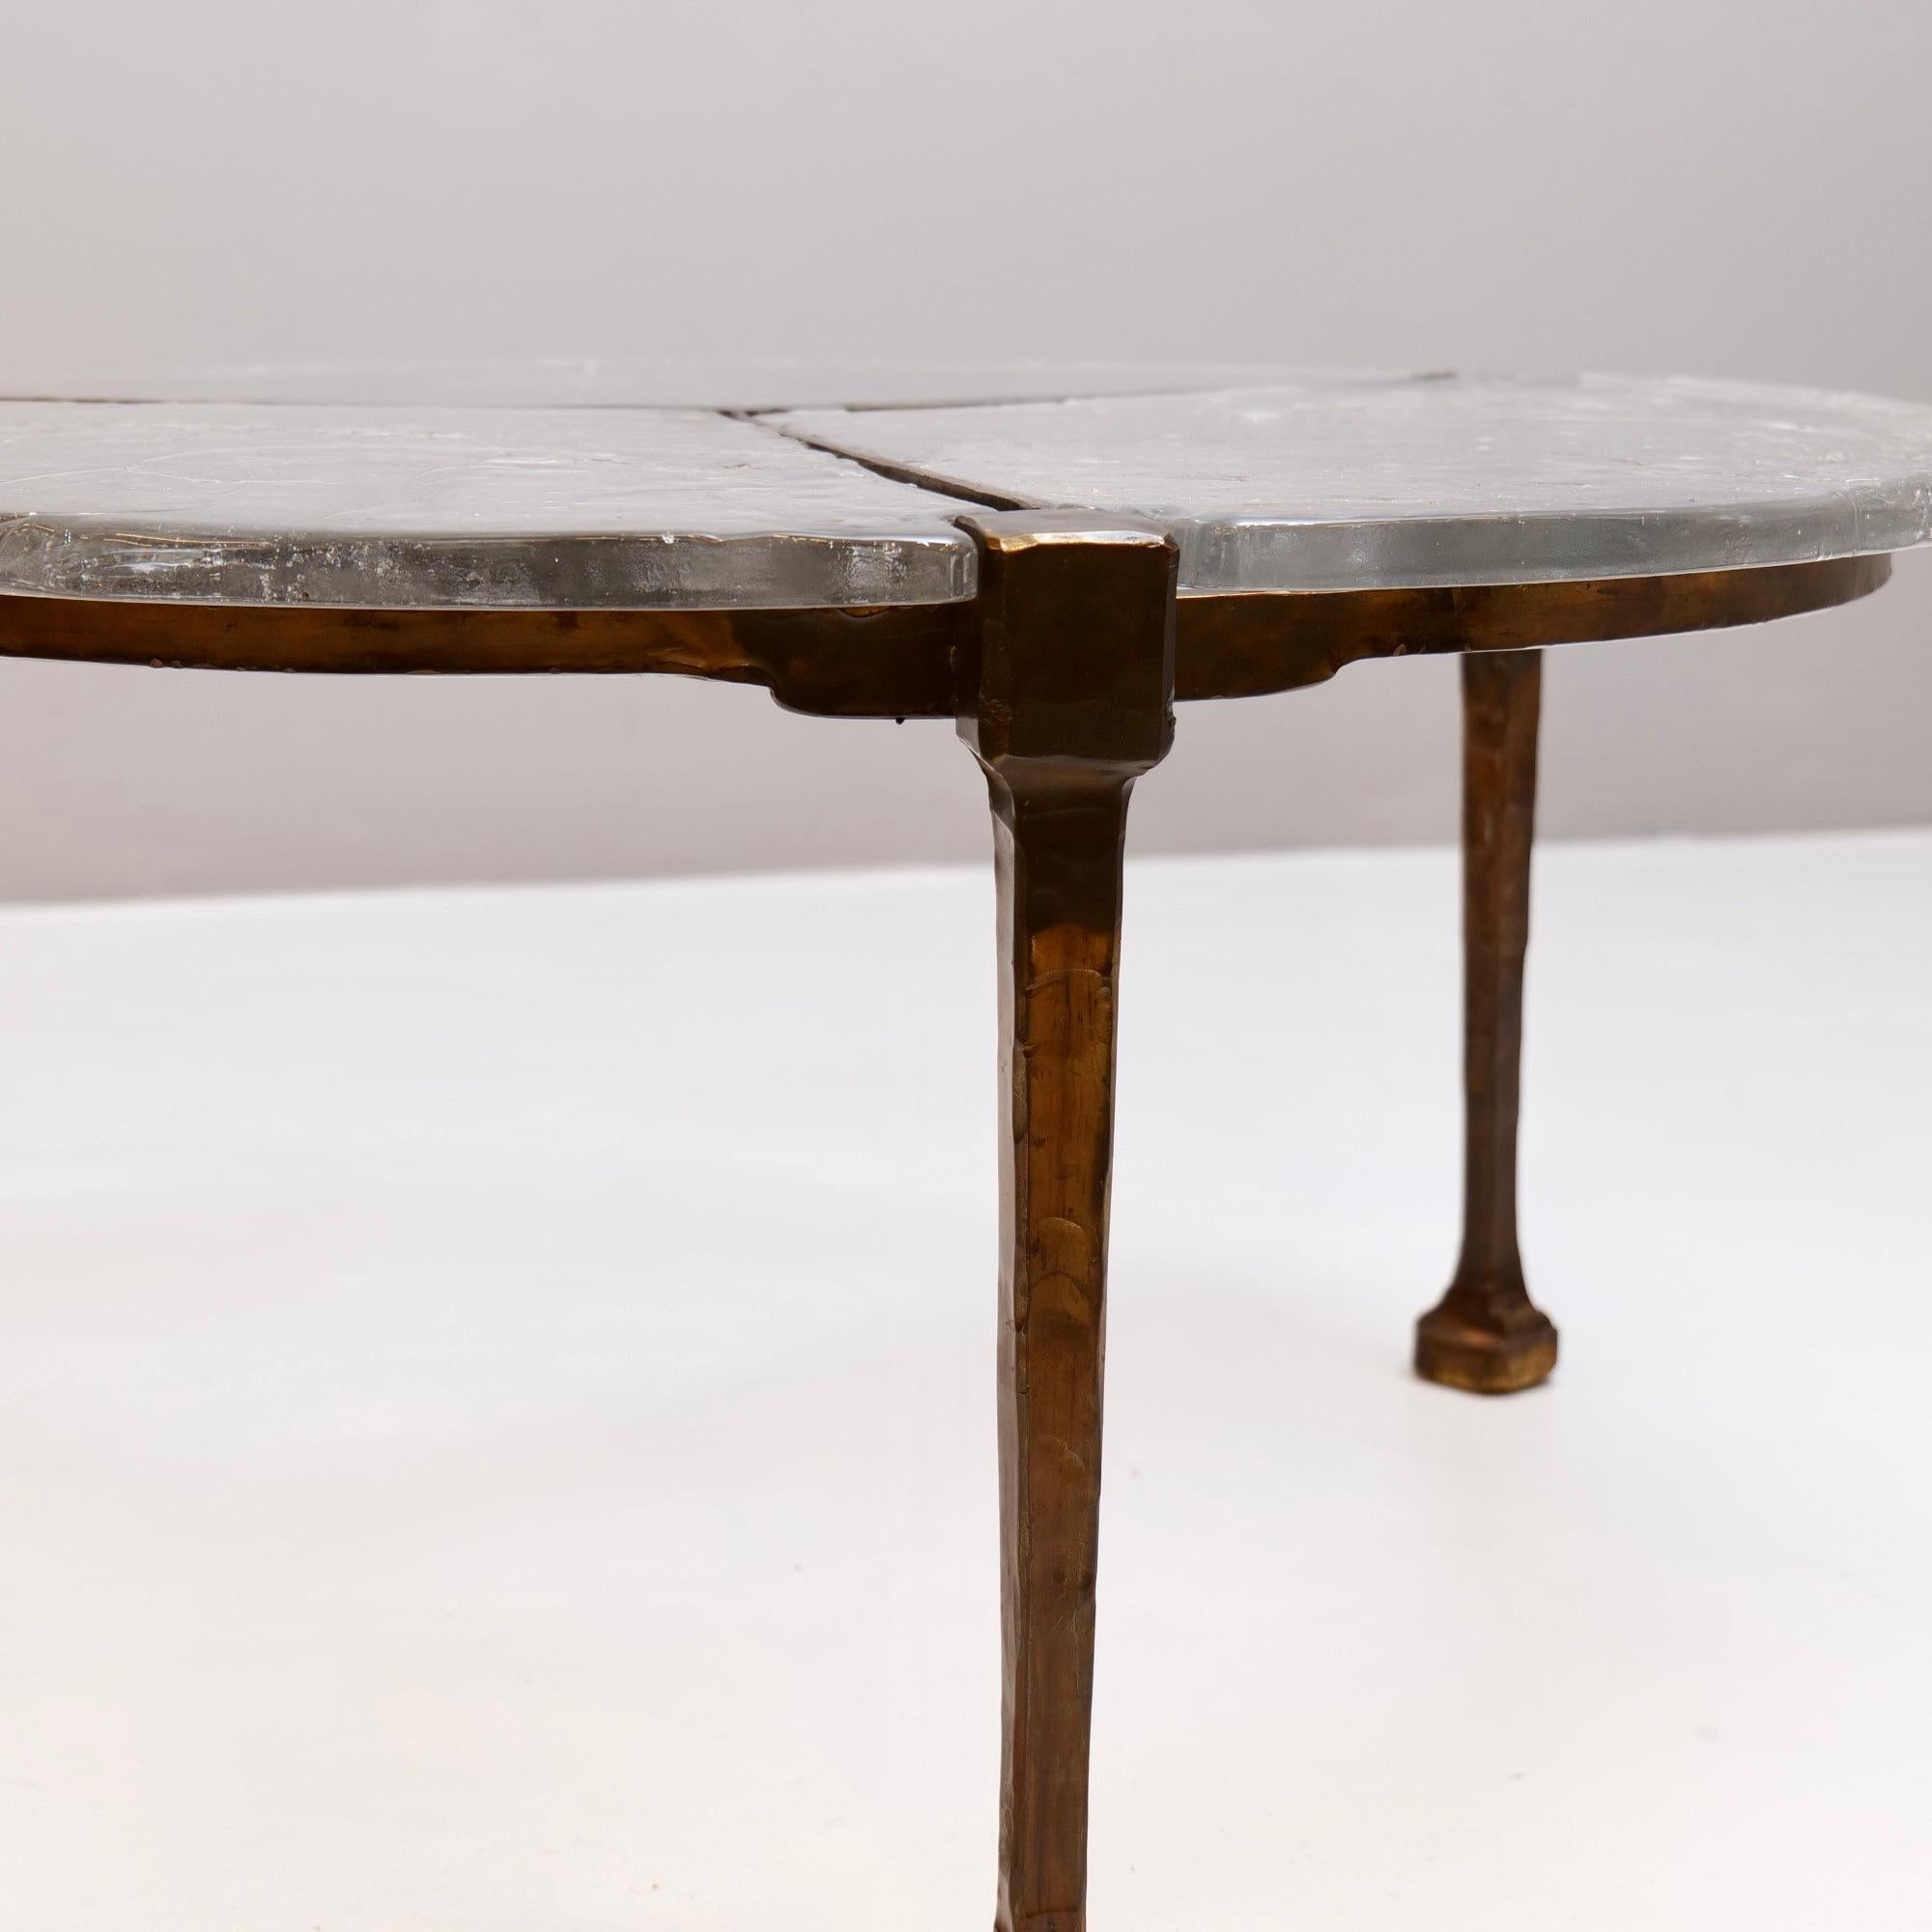 Late 20th Century forged bronze & glass table by Lothar Klute - 1980s